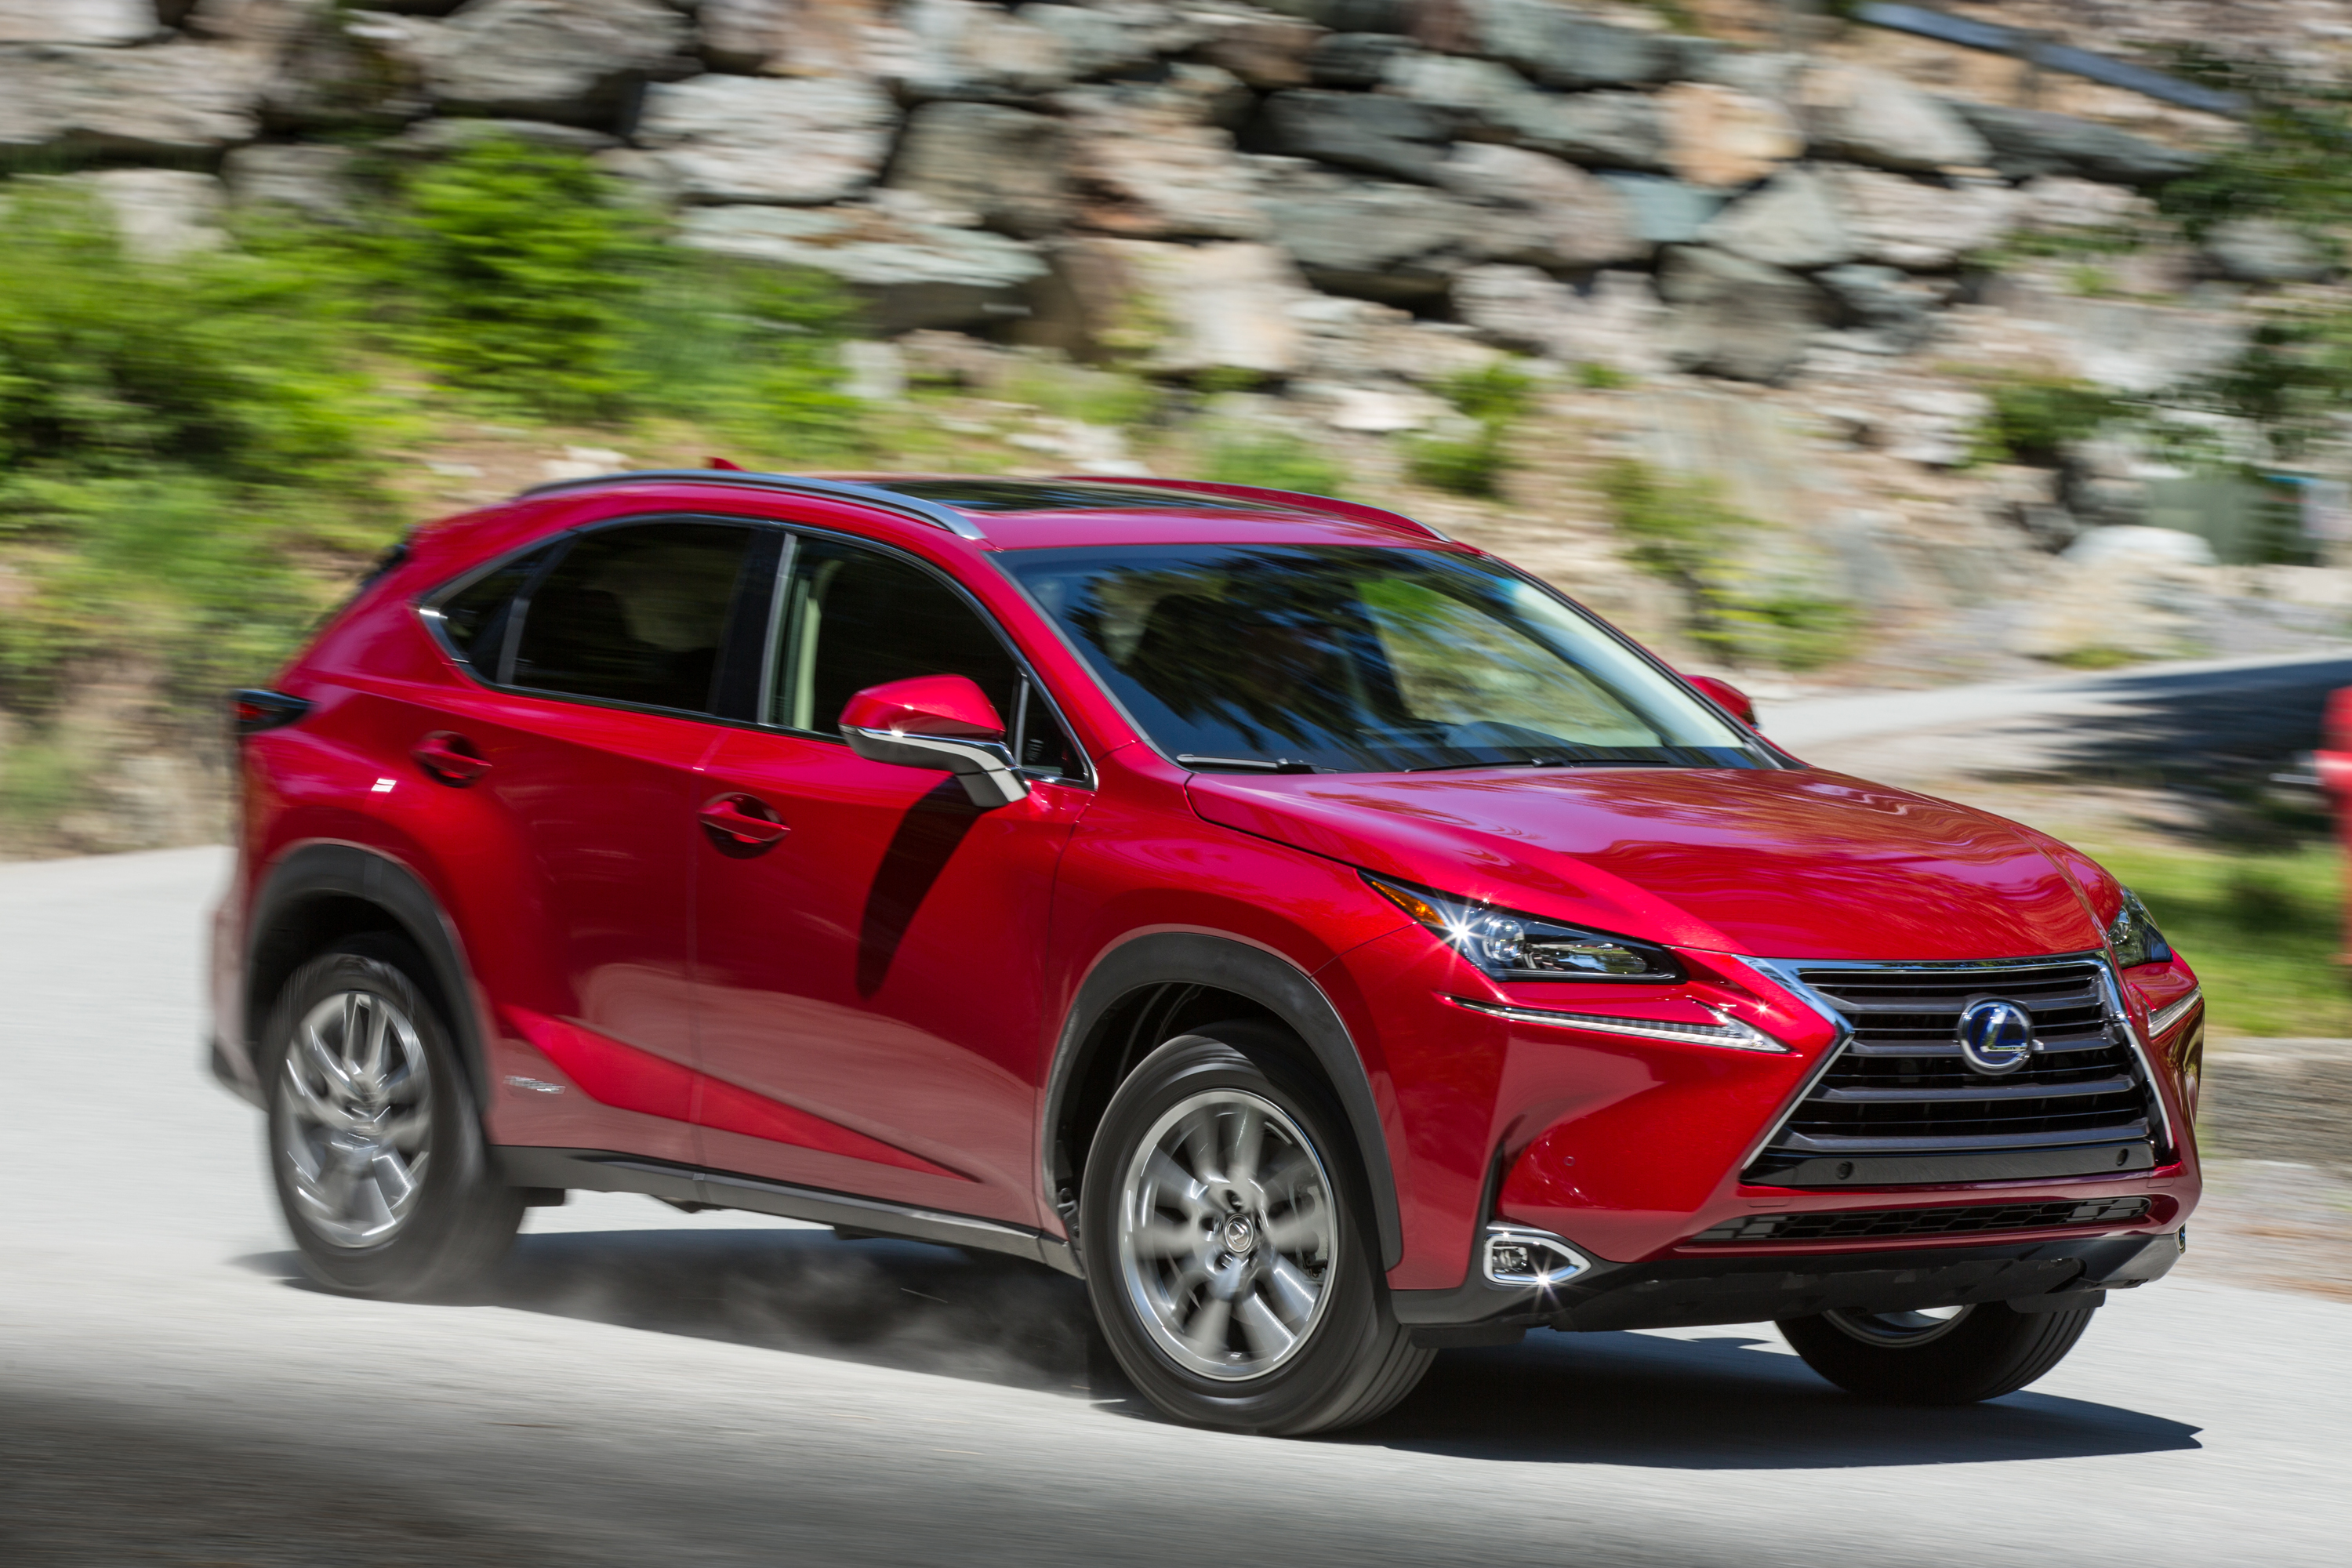 And Then There Were Six - Lexus NX 300h Compact Luxury Utility Vehicle  Expands Hybrid Lineup - Lexus USA Newsroom